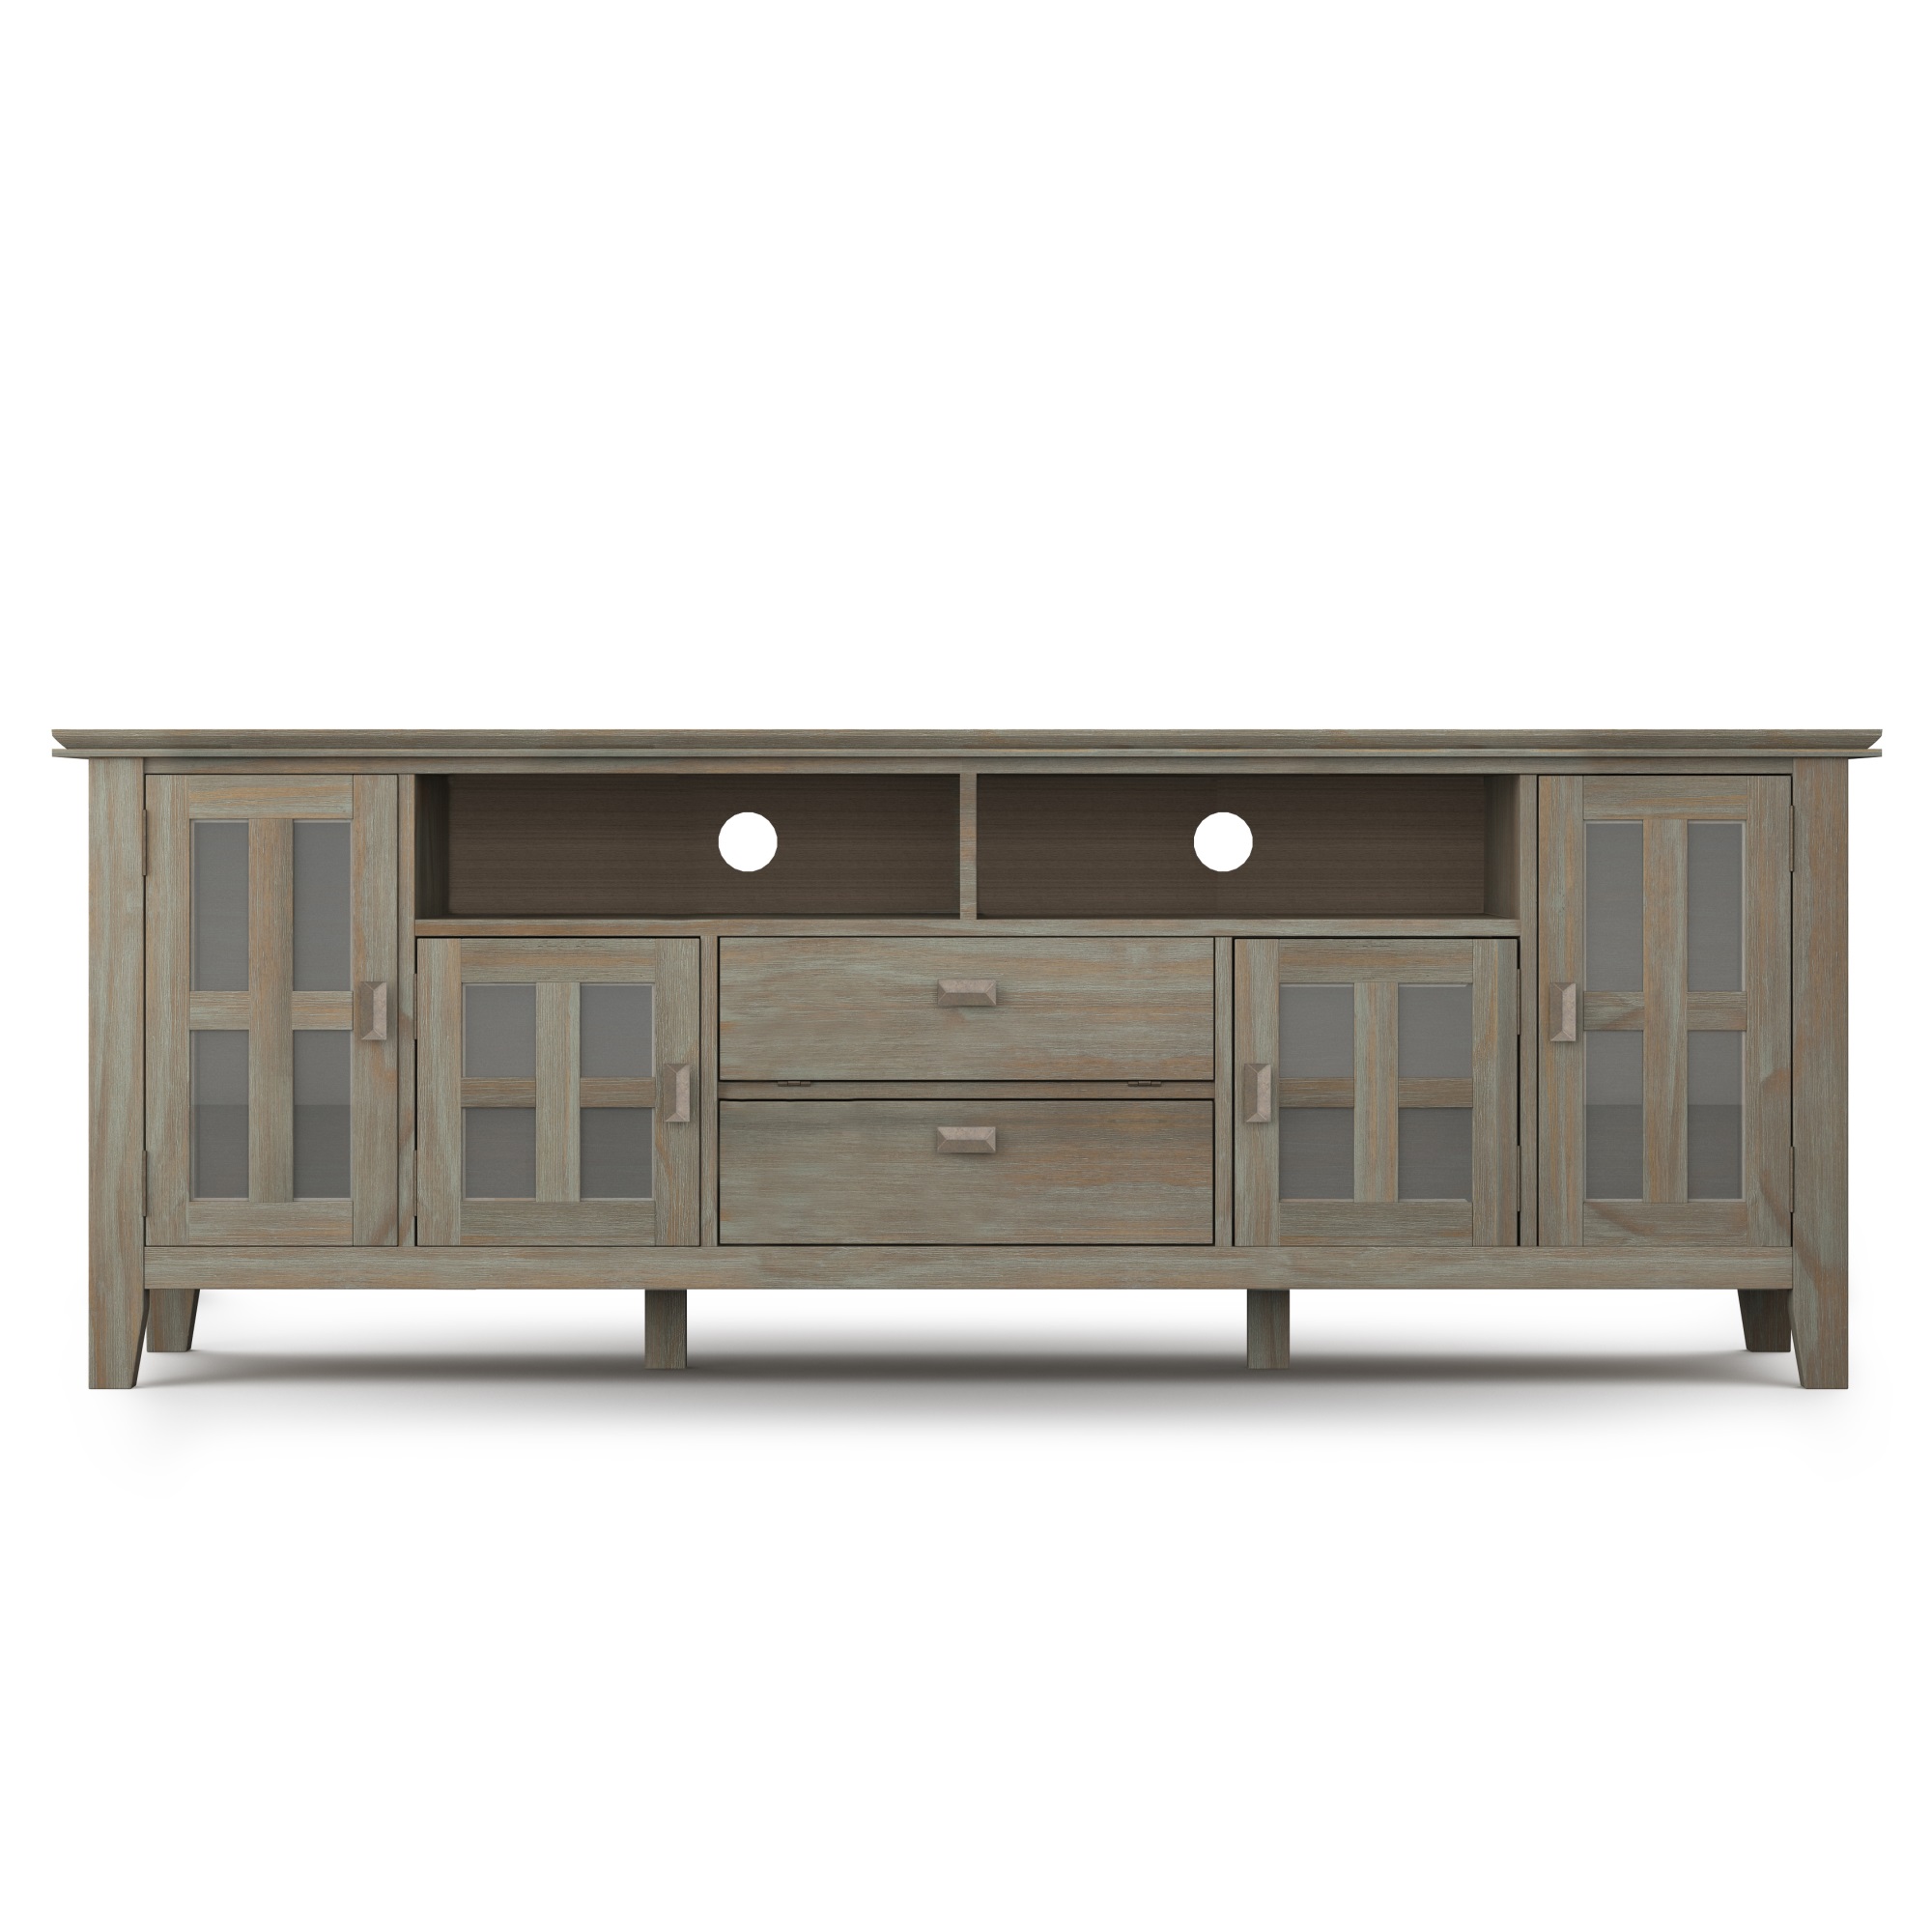 Simpli Home Artisan SOLID WOOD 72 inch Wide Transitional TV Media Stand in Distressed Grey For TVs up to 80 inches